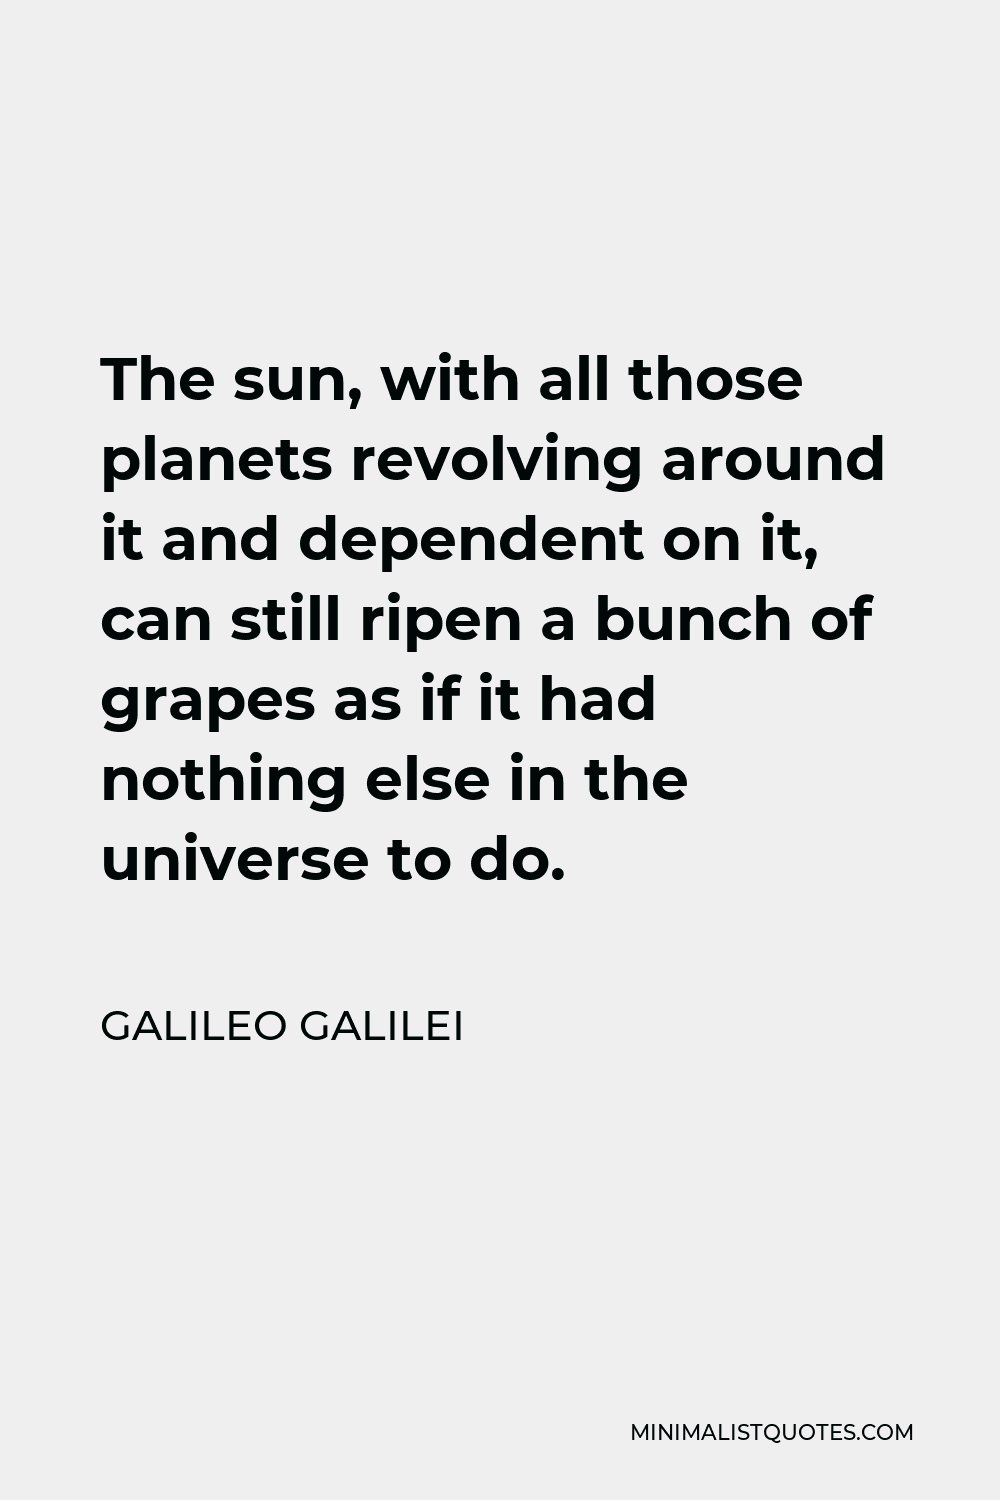 Galileo Galilei Quote - The sun, with all those planets revolving around it and dependent on it, can still ripen a bunch of grapes as if it had nothing else in the universe to do.